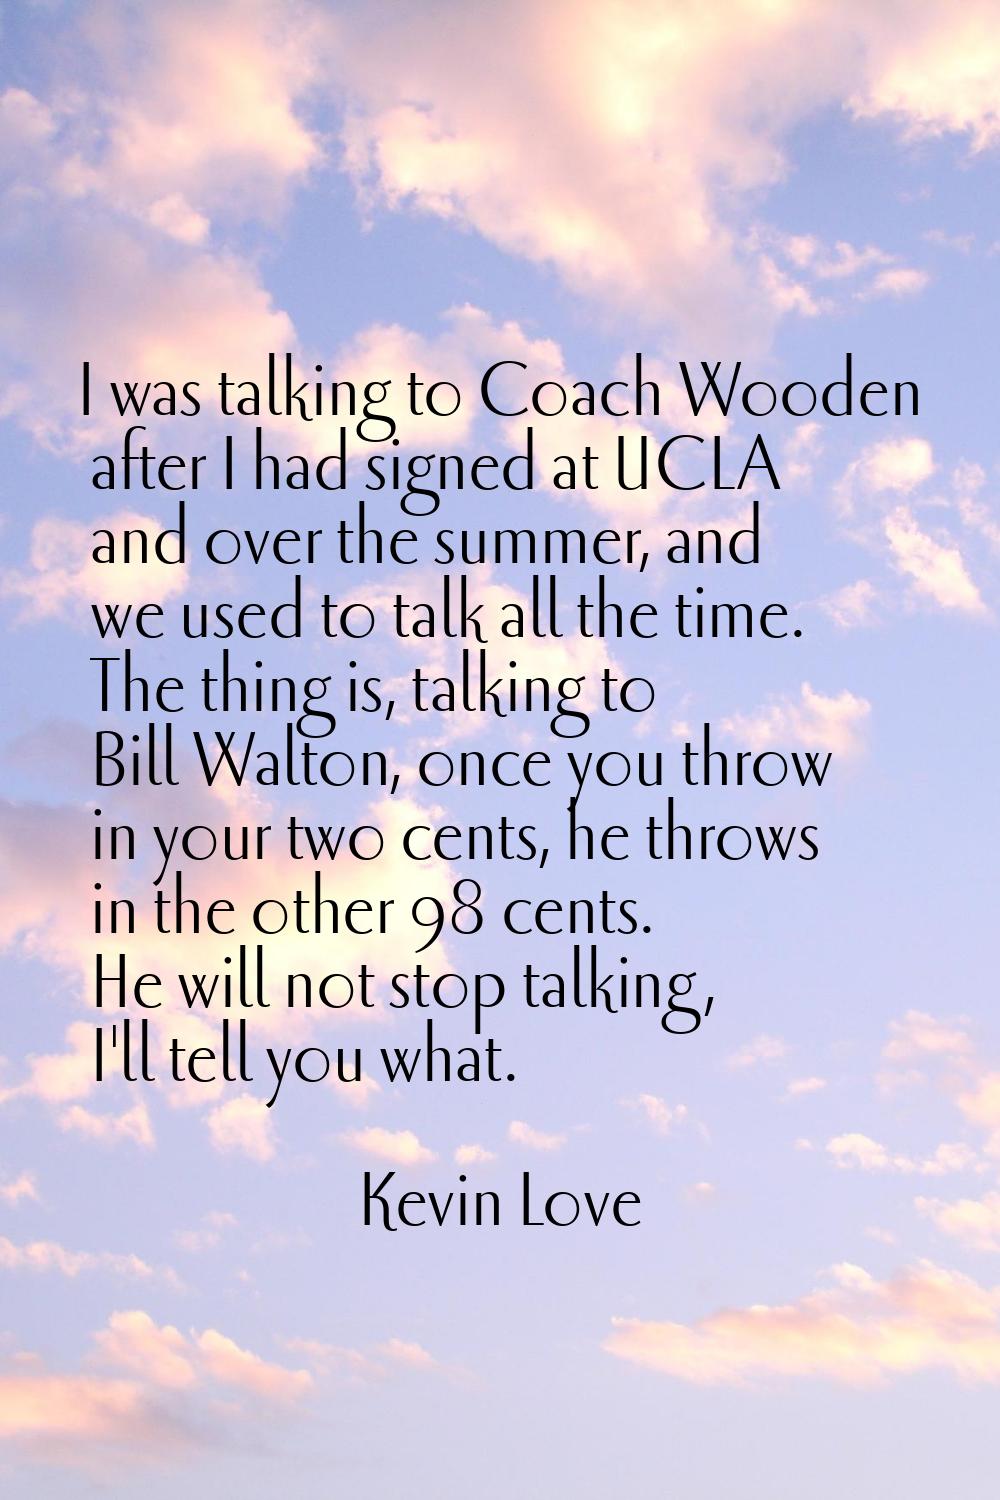 I was talking to Coach Wooden after I had signed at UCLA and over the summer, and we used to talk a